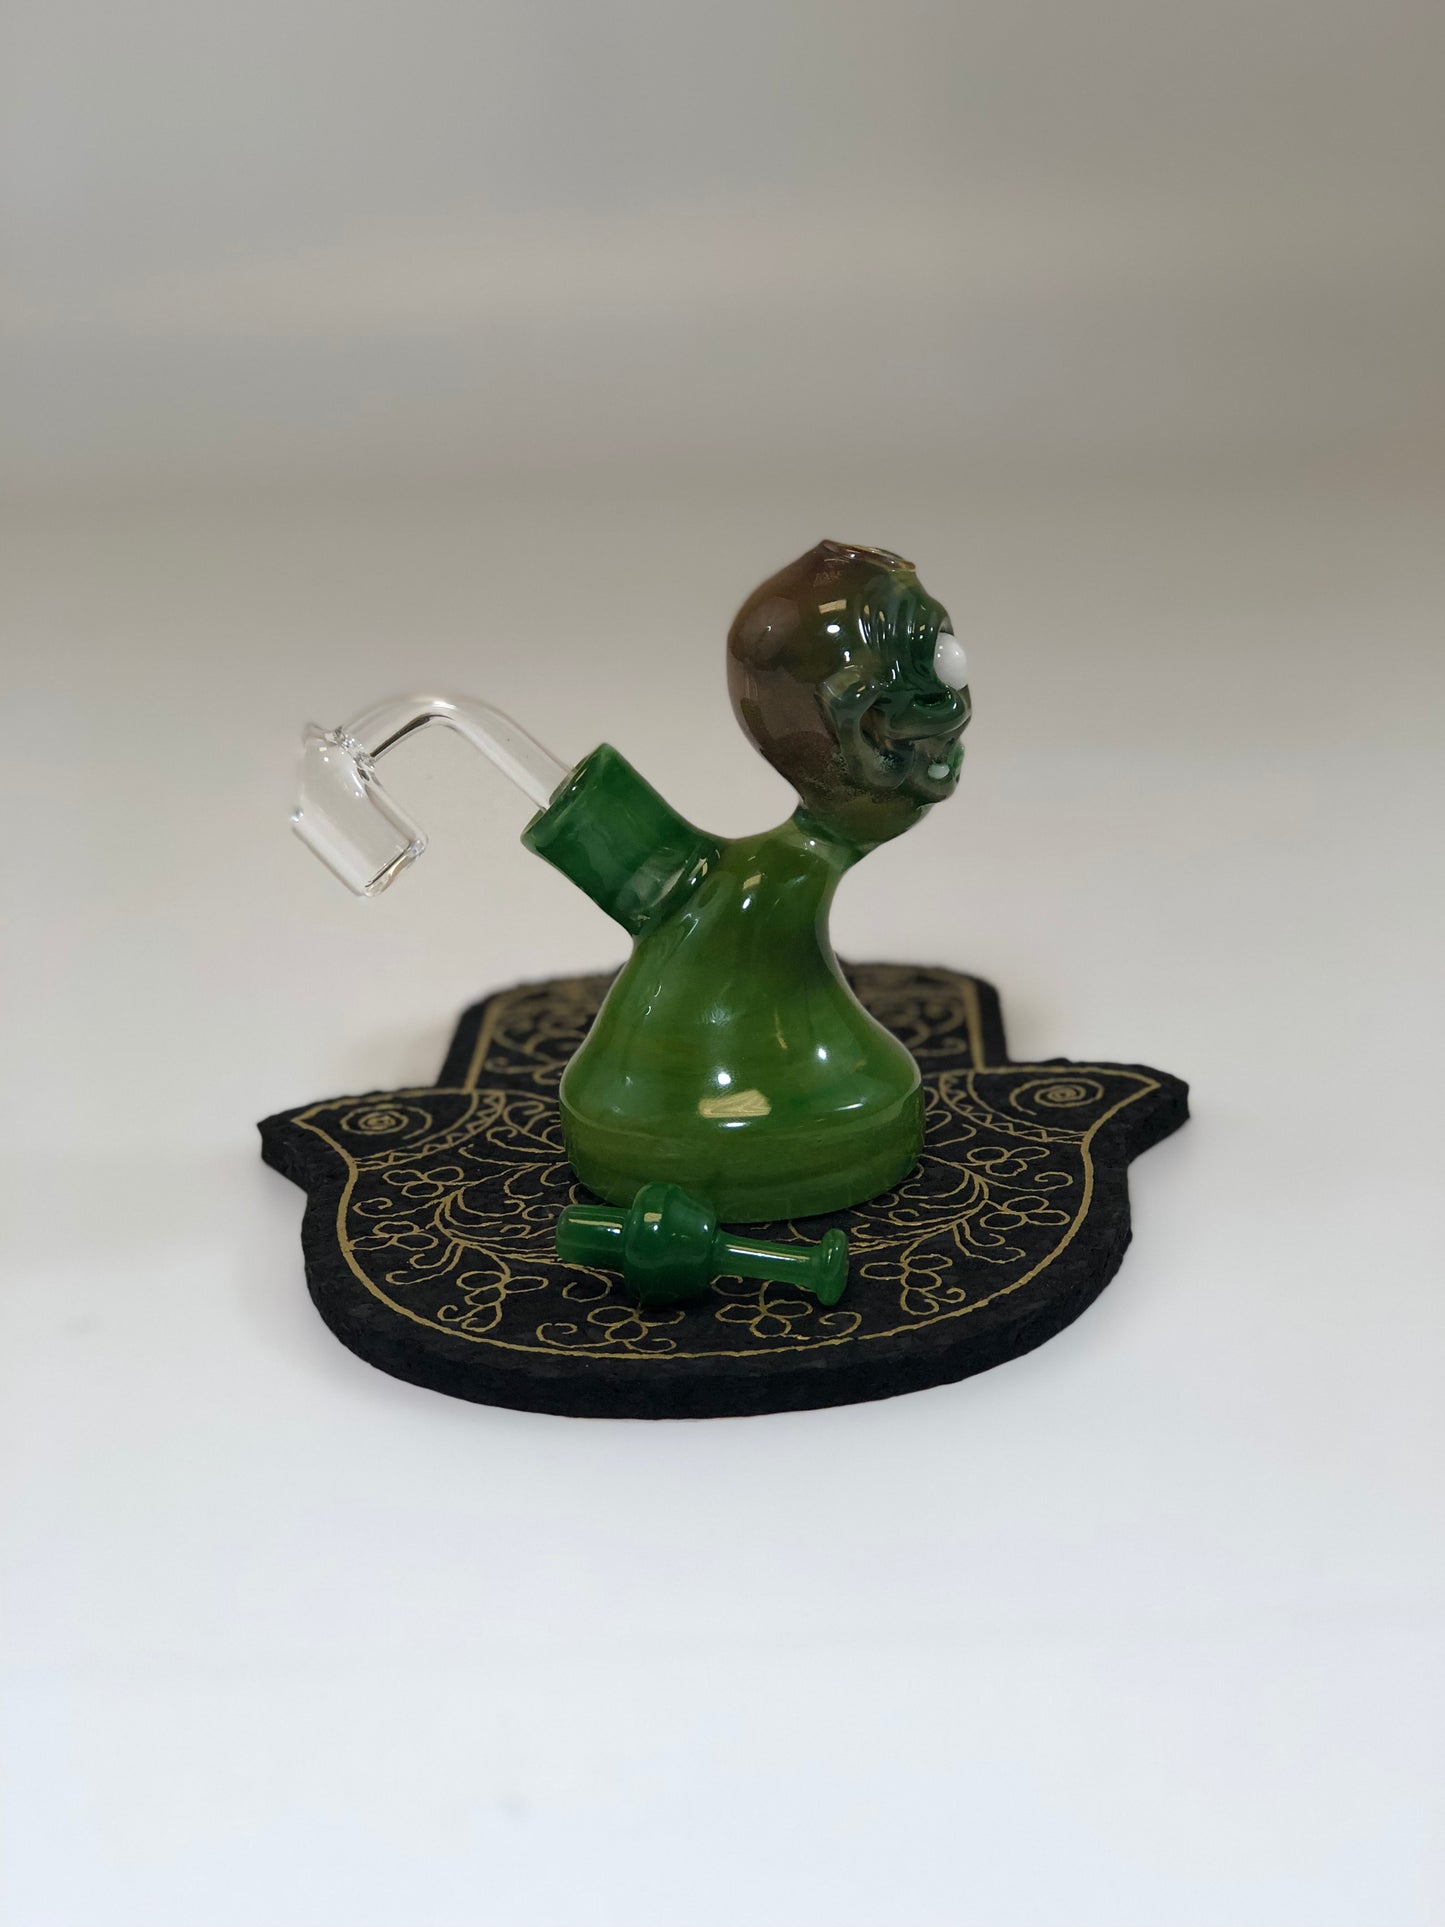 Tales from the Crypt inspired rig by Zink Glass